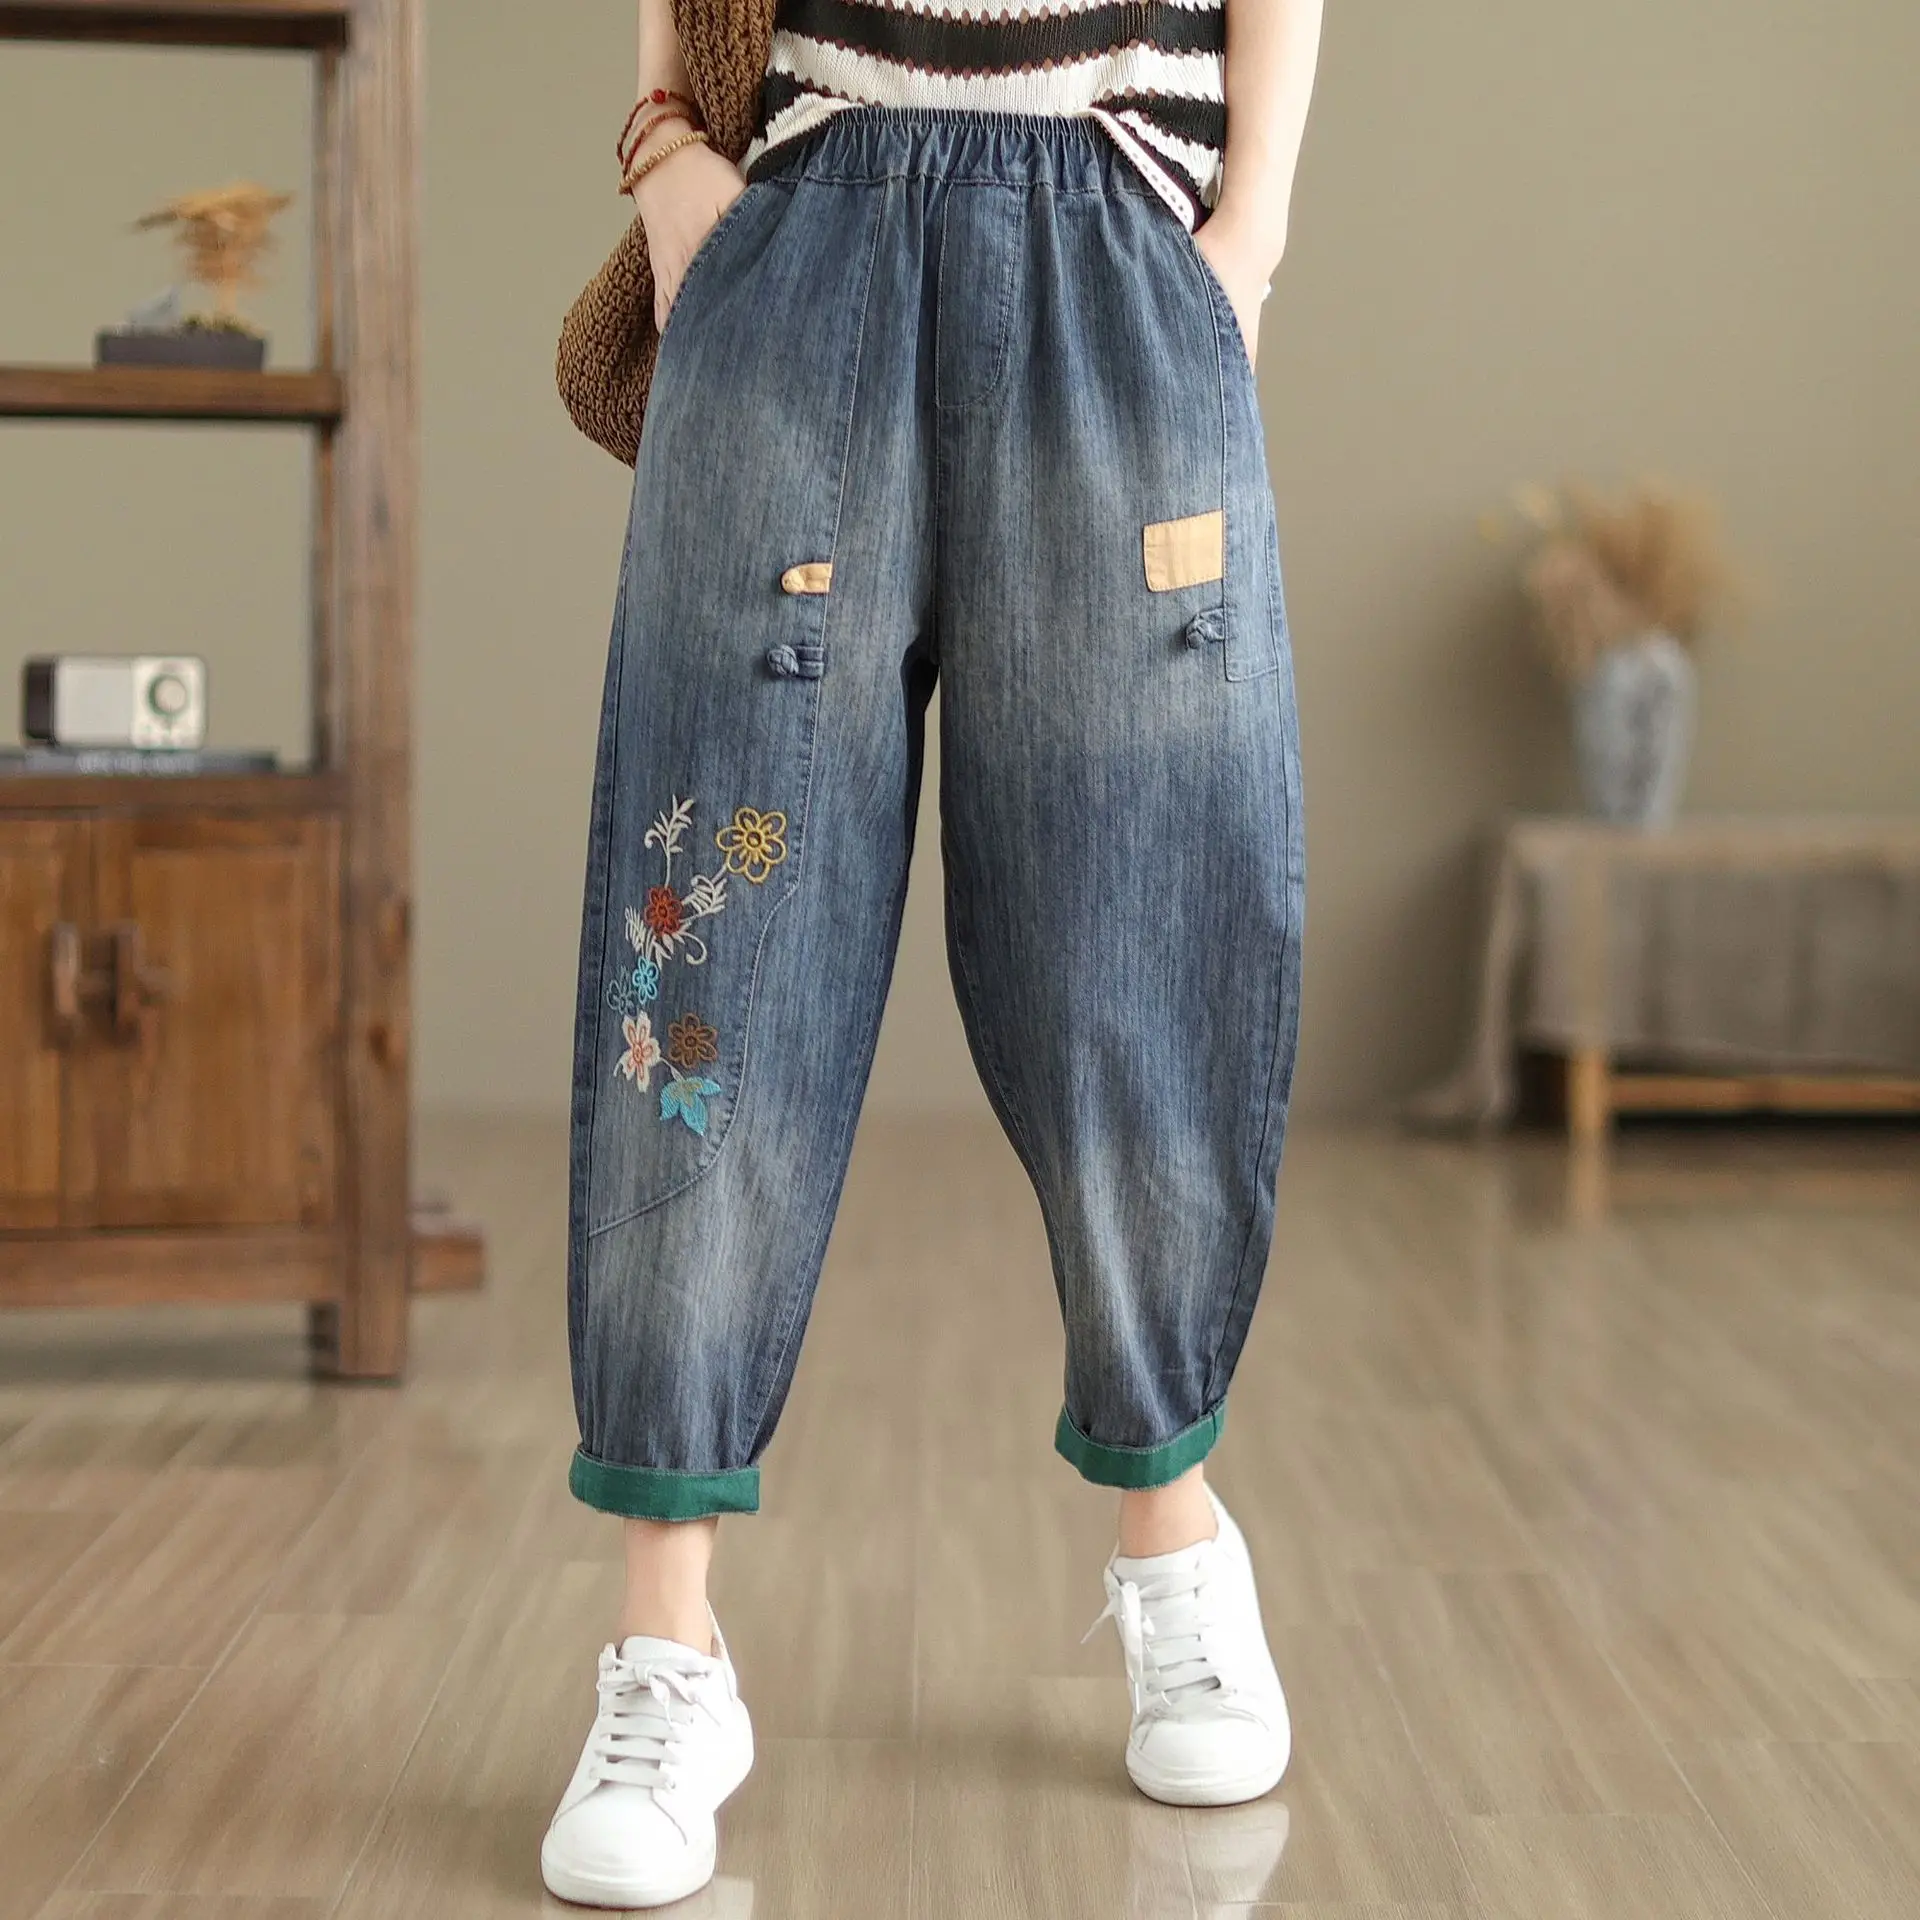 

Aricaca New High Quality Women M-XL Retro Patch Embroidered Jeans Casual Denim Pants